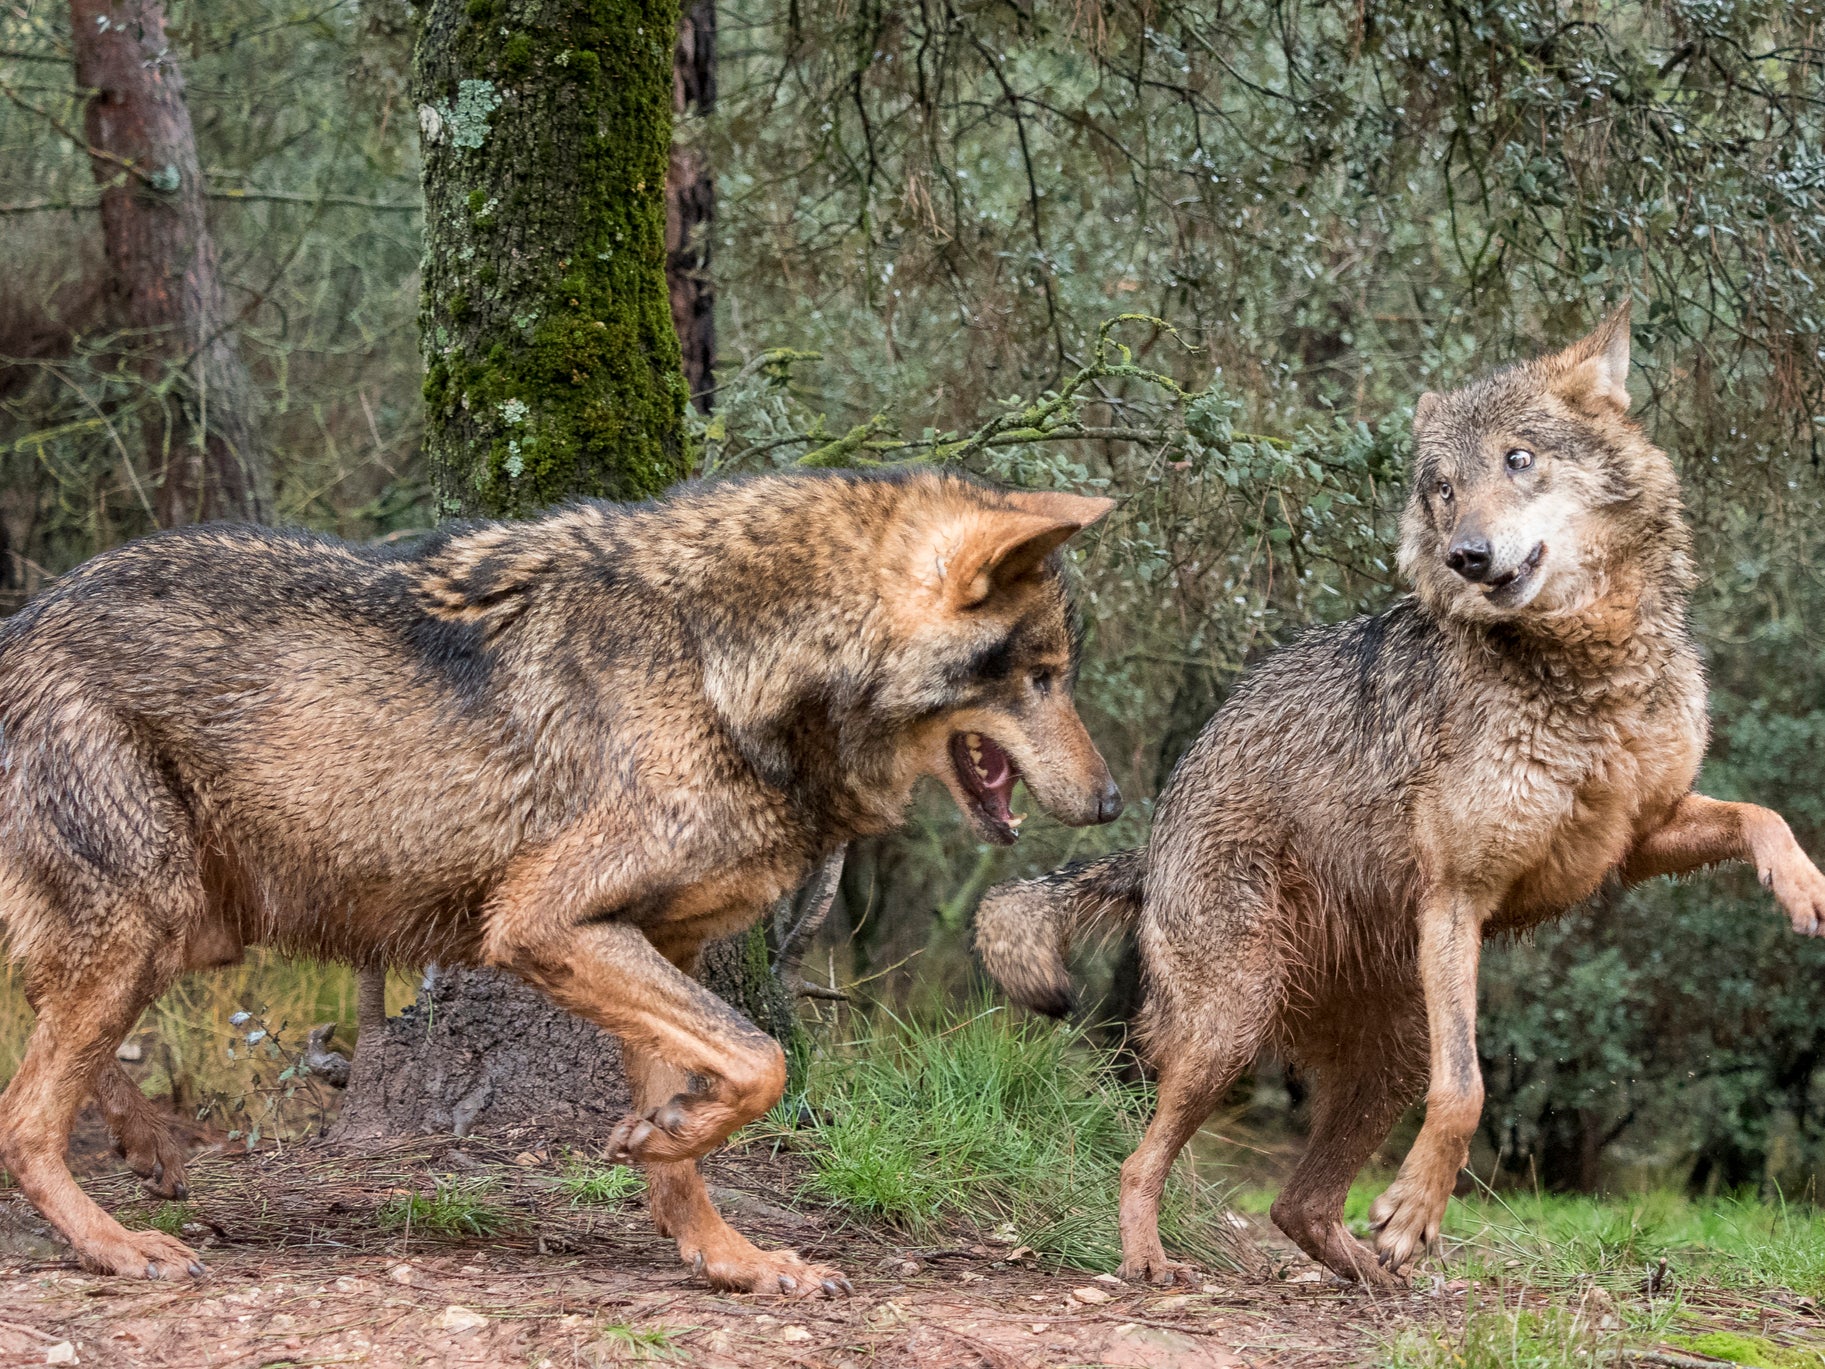 Foxtrot or flamenco? A pair of Iberian wolves flirt on a hot day in Spain